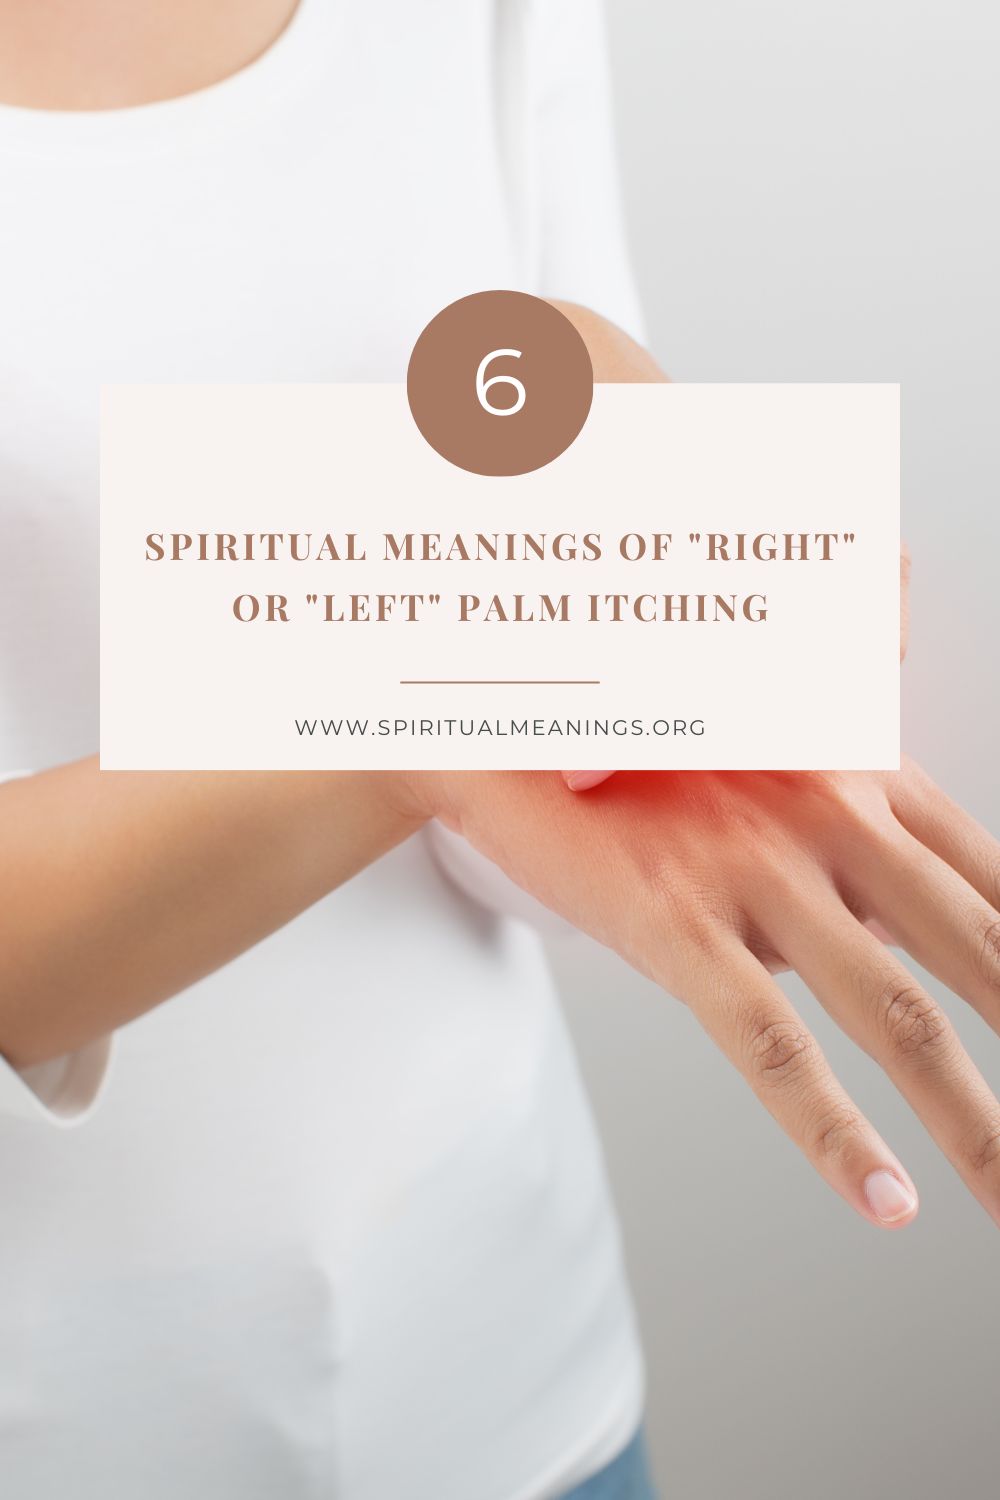 Many spiritual meanings of itchy palms